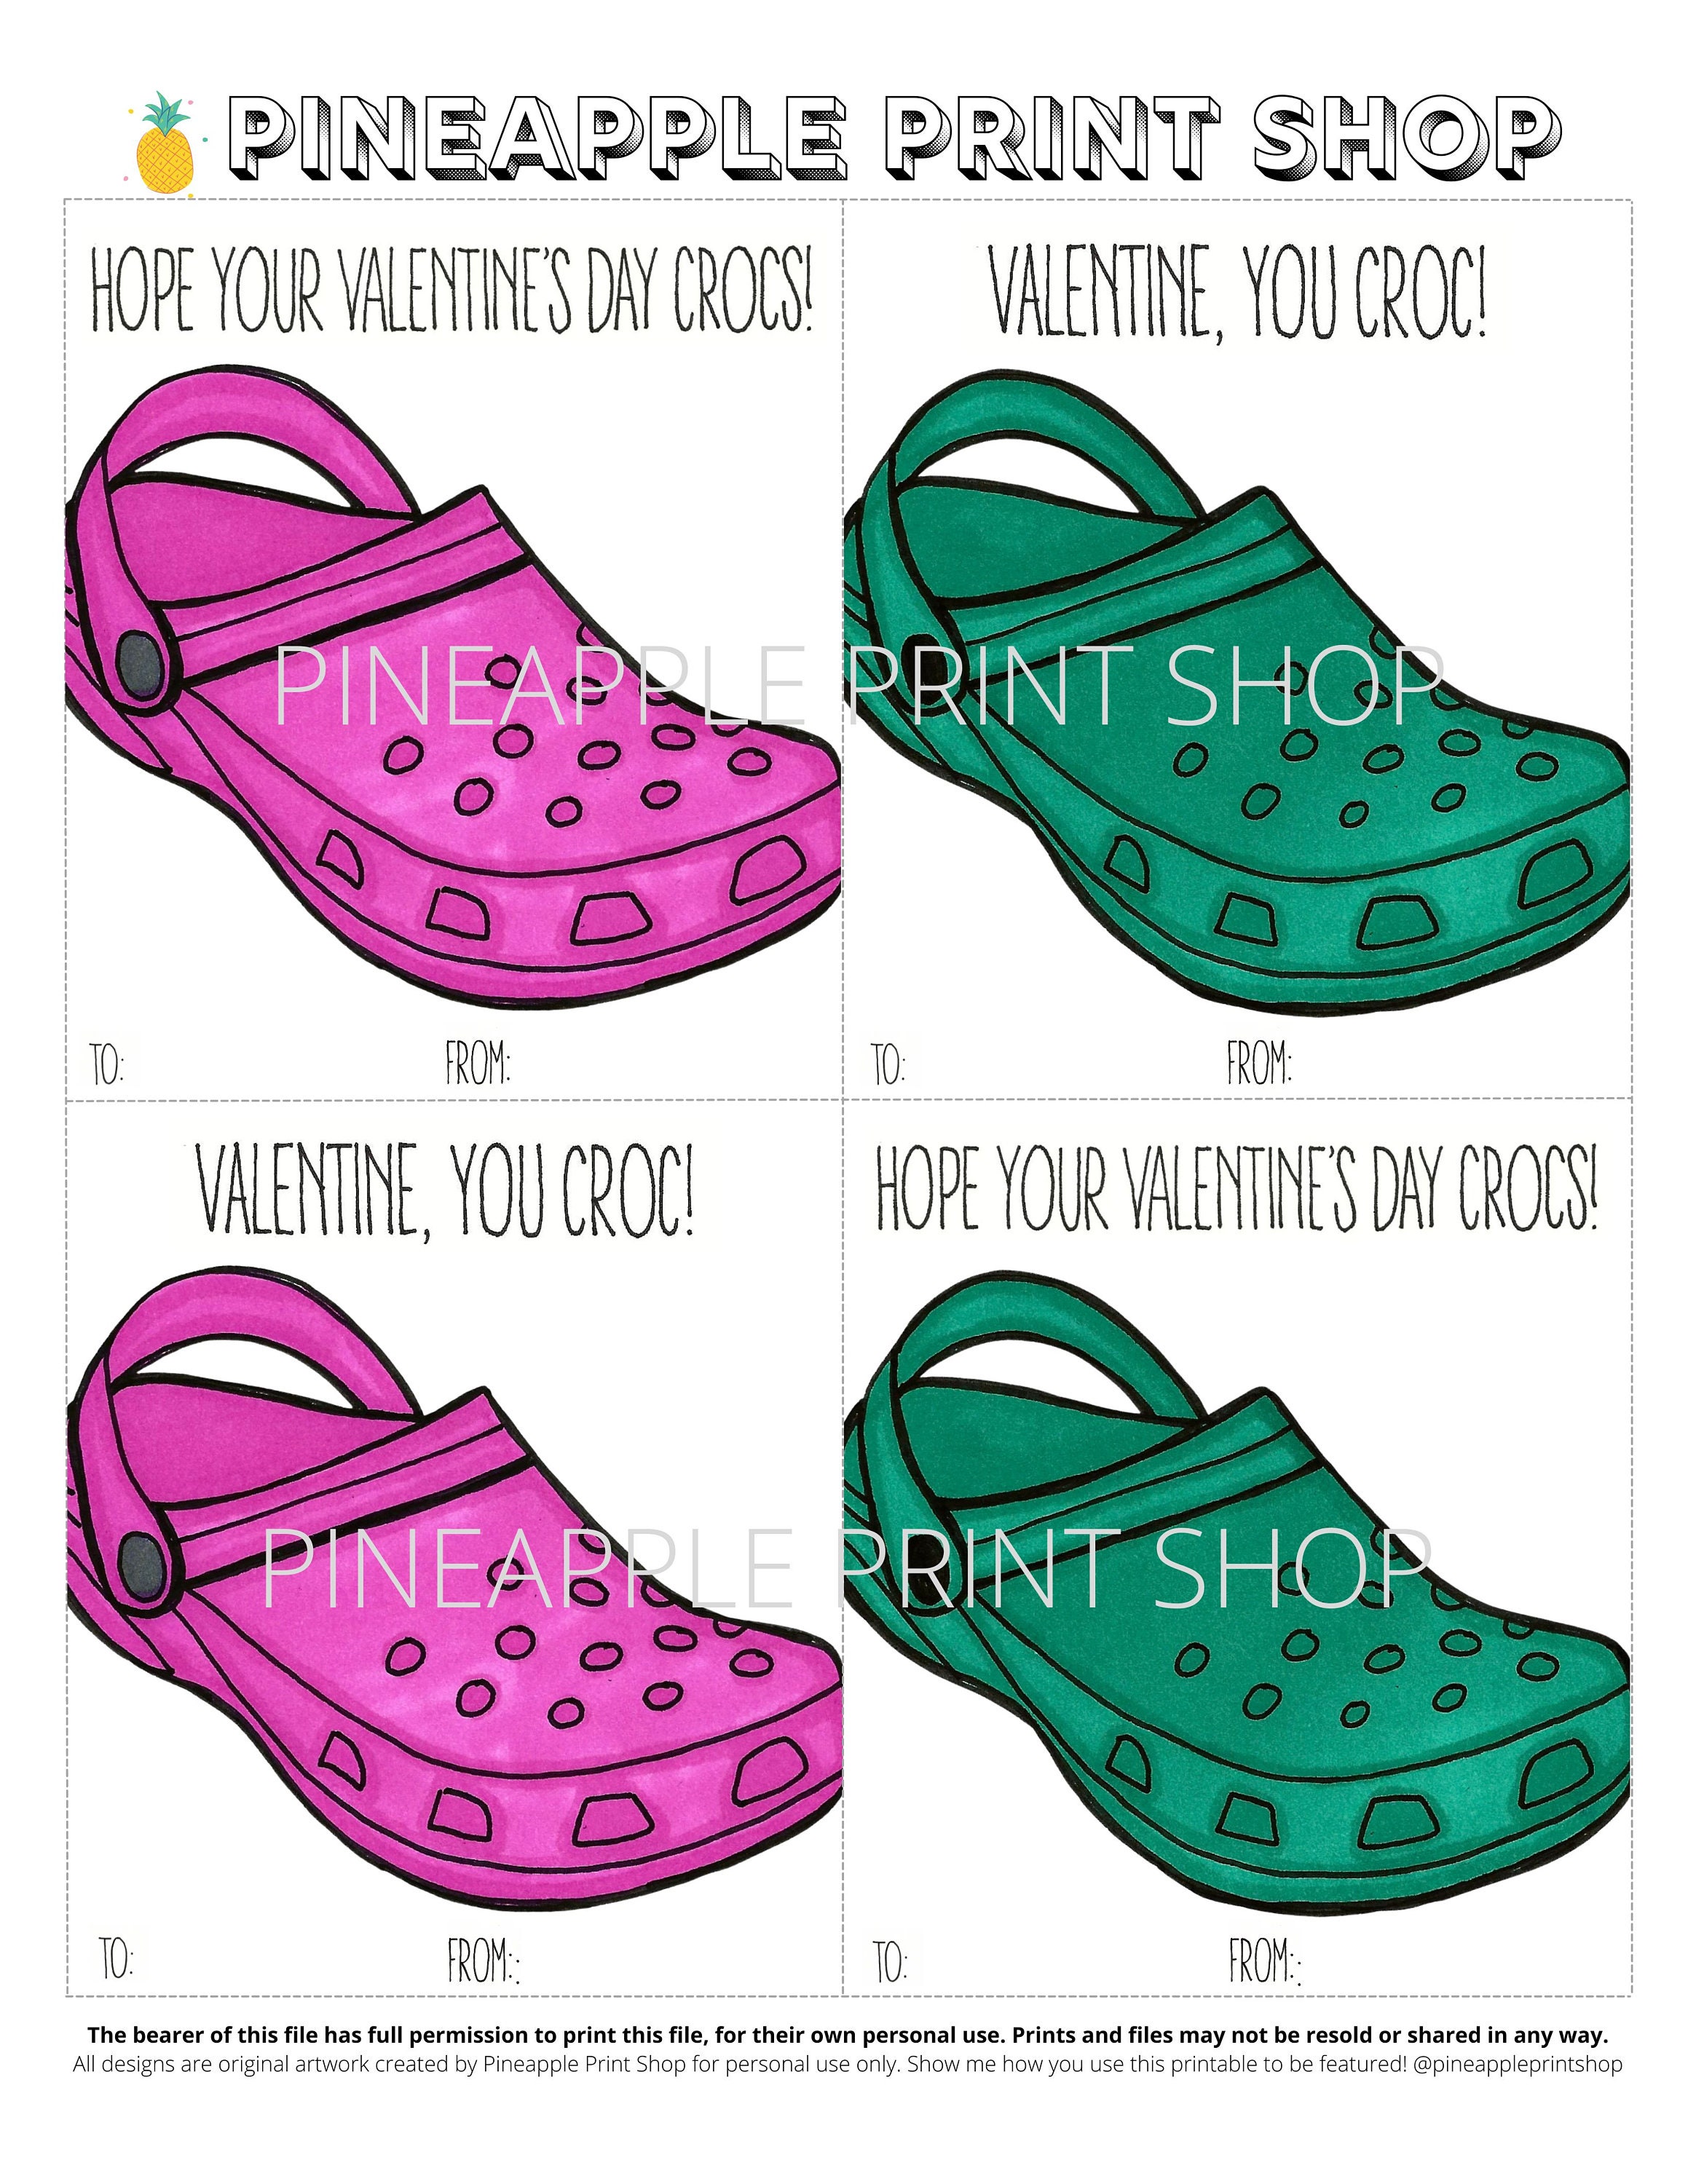 New Arrival Valentine Day Croc Shoe Charms For Sweetheart Lover Lady Favor  For Clog Charm Decoration Wholesale From Sdshoes, $0.12